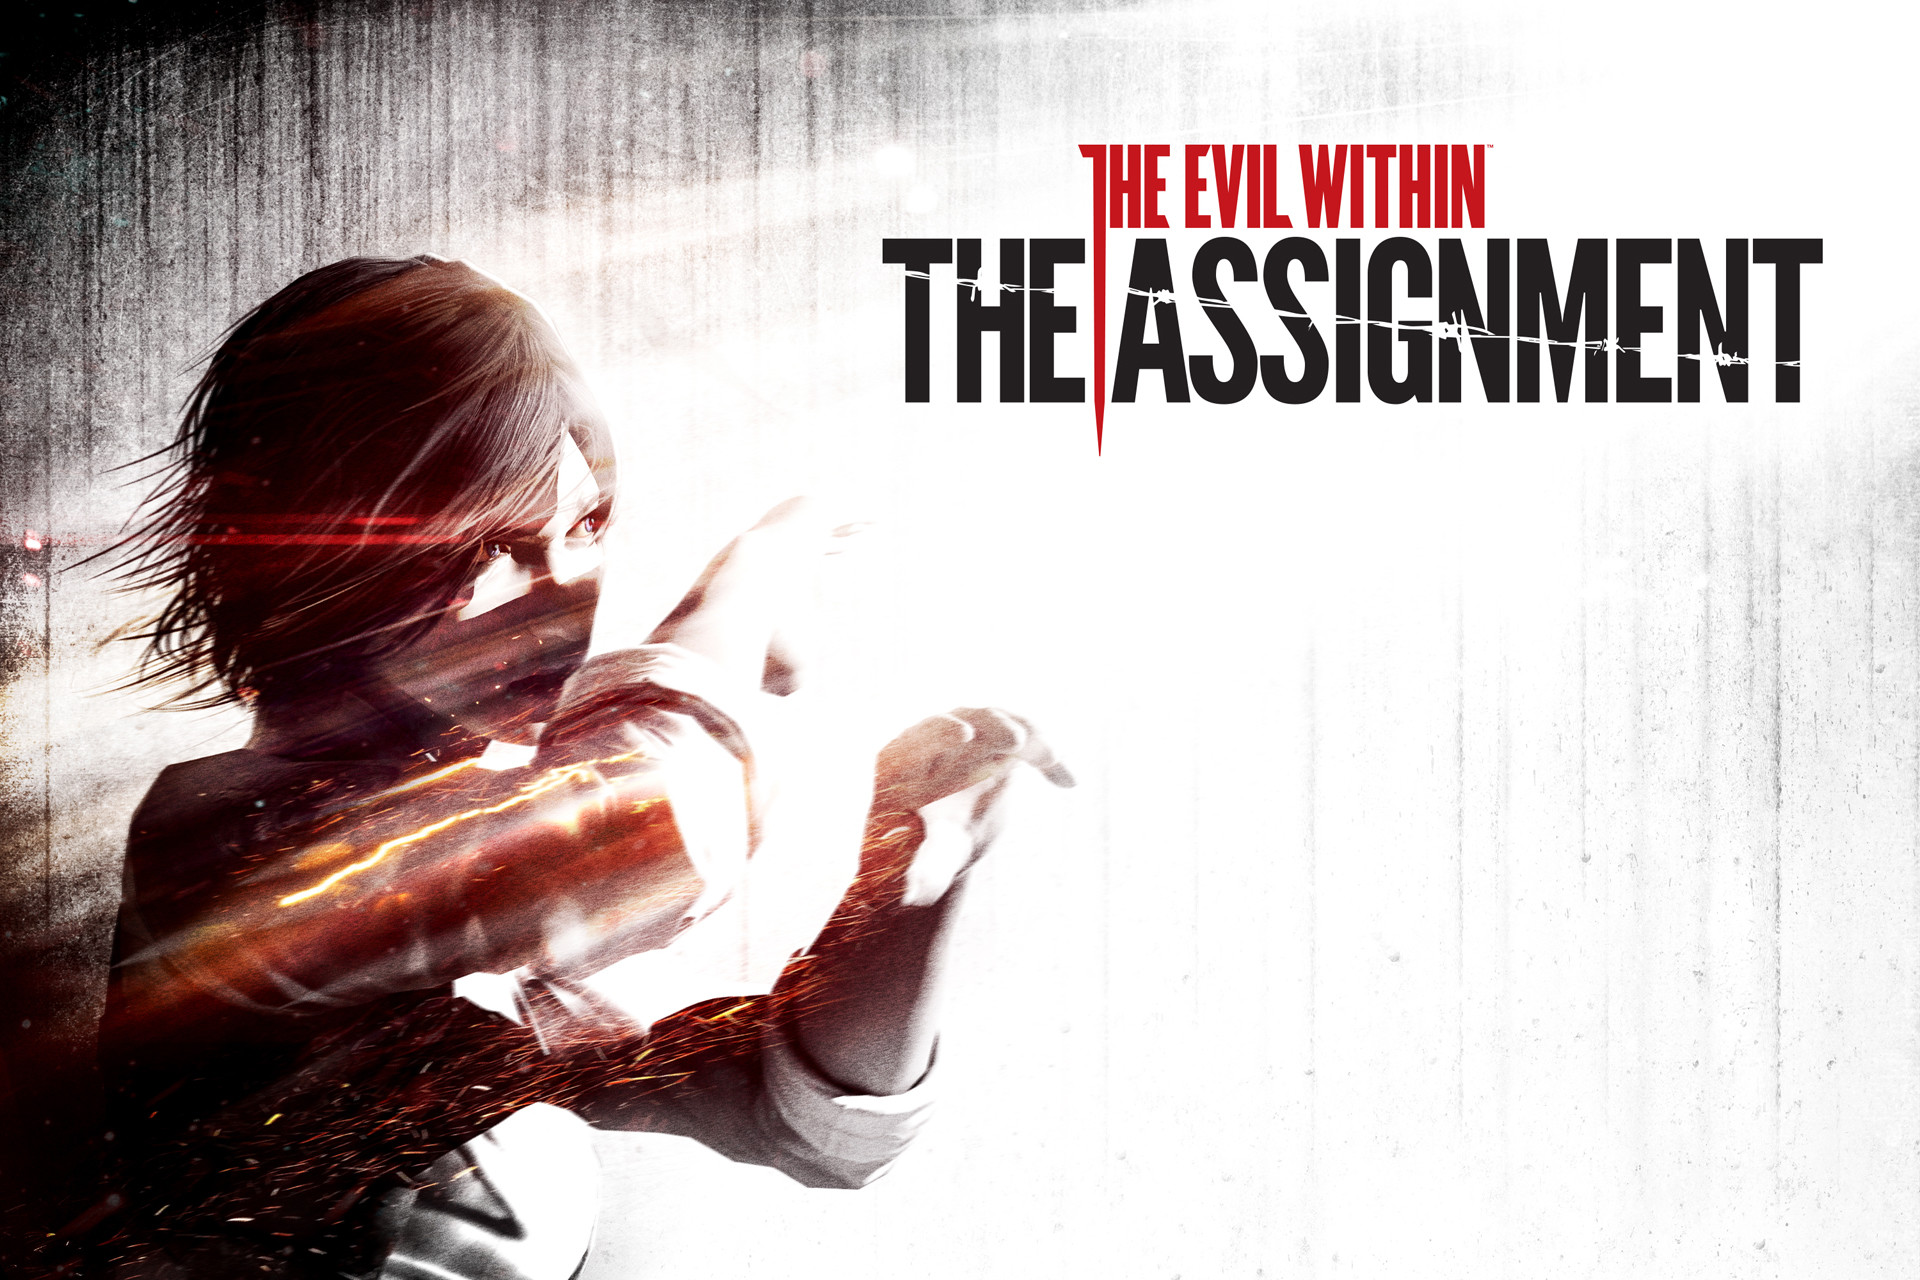 download the new version The Evil Within